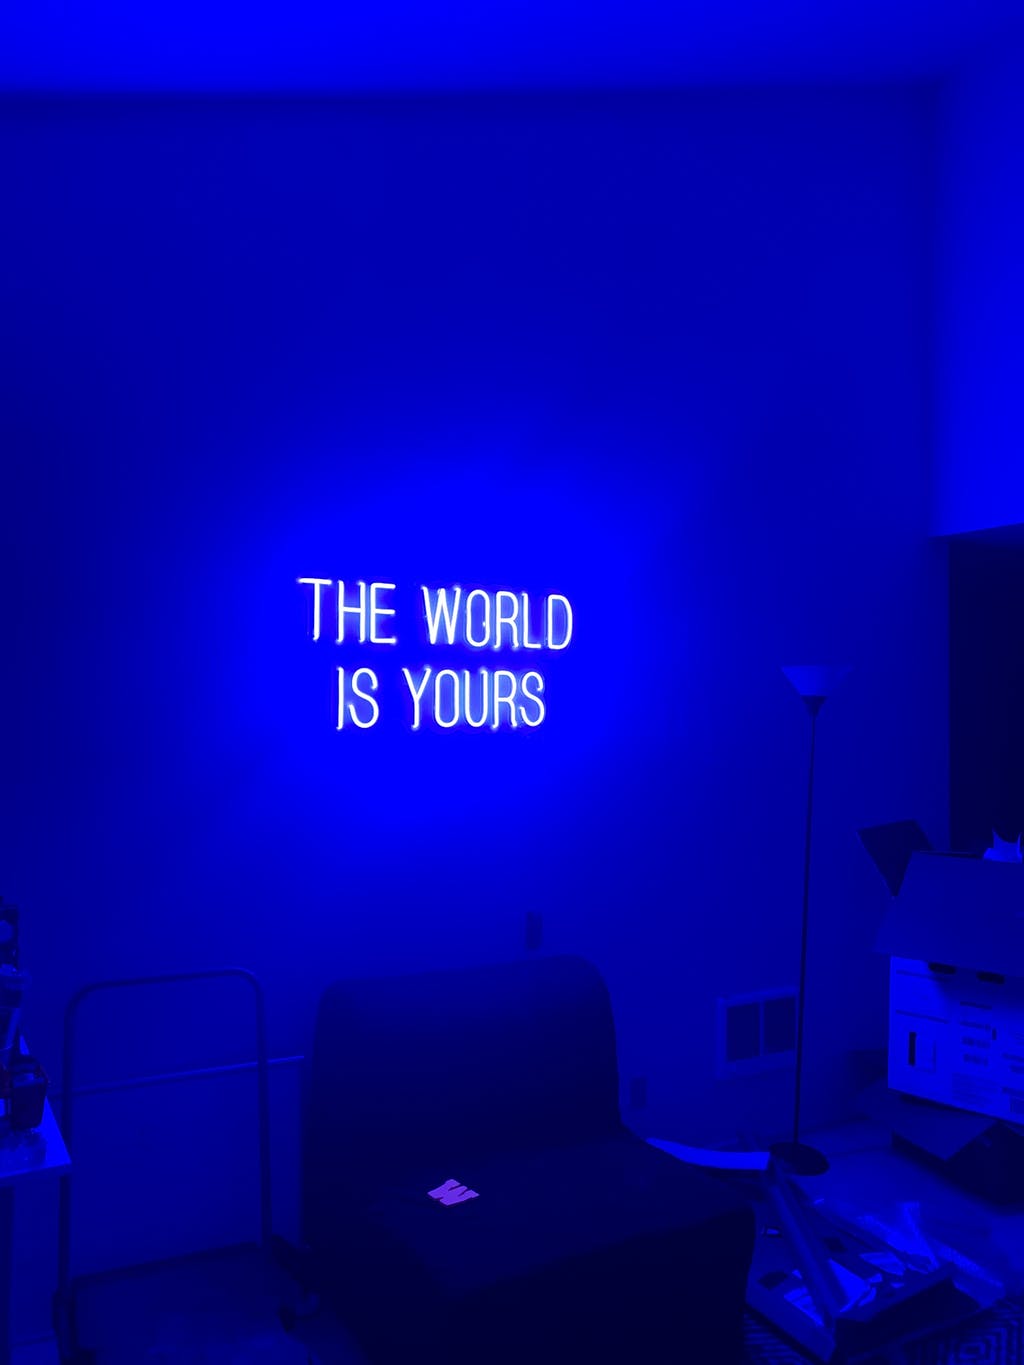 THE WORLD IS YOURS Neon LED Sign - Fancelite